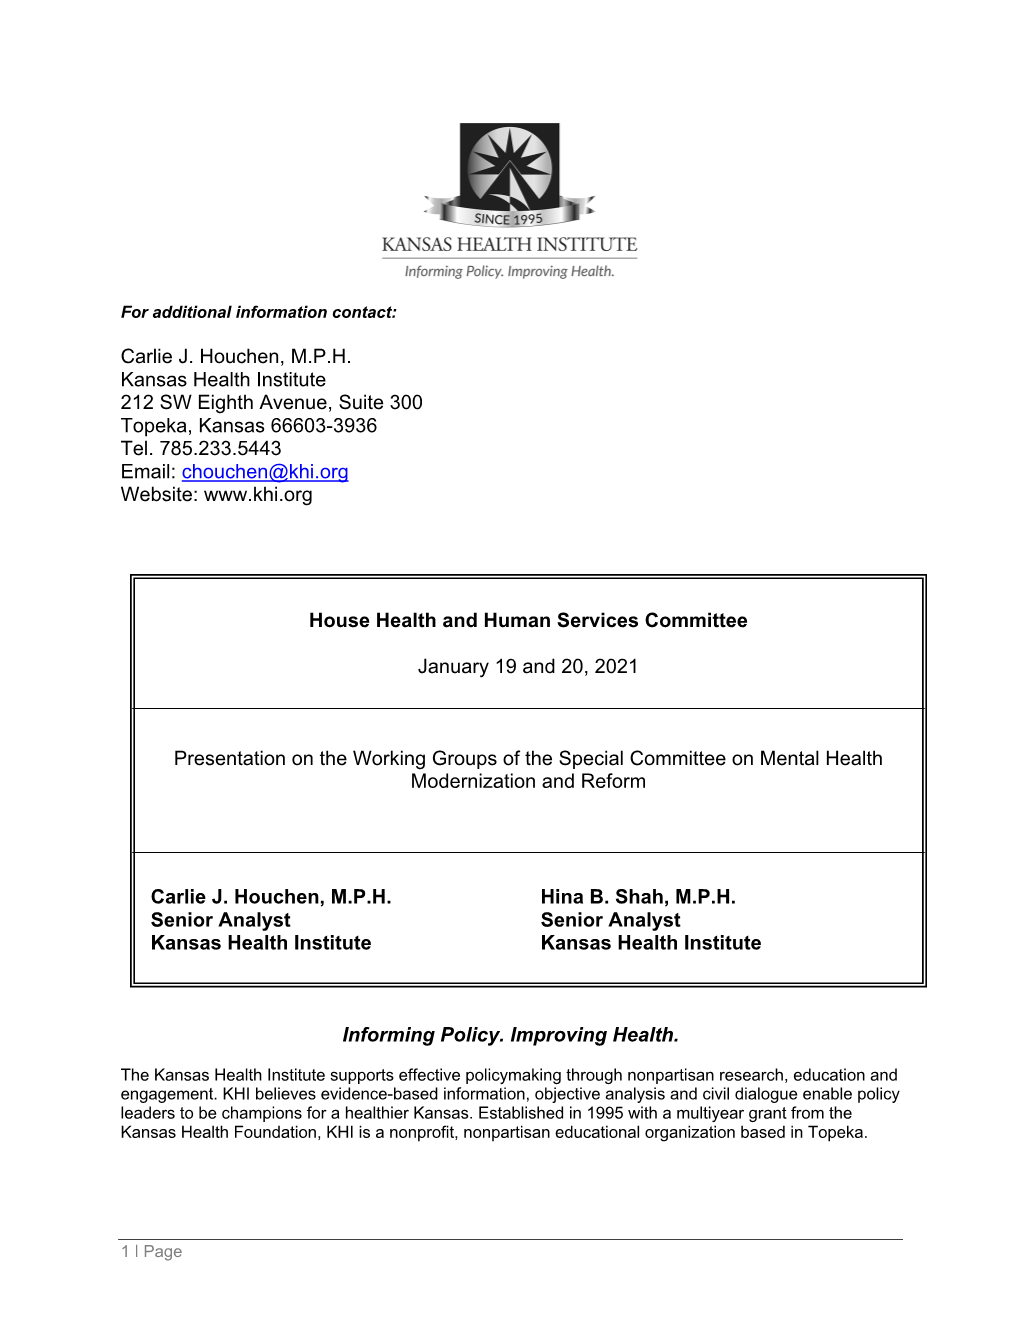 Working Groups of the Special Committee on Mental Health Modernization and Reform